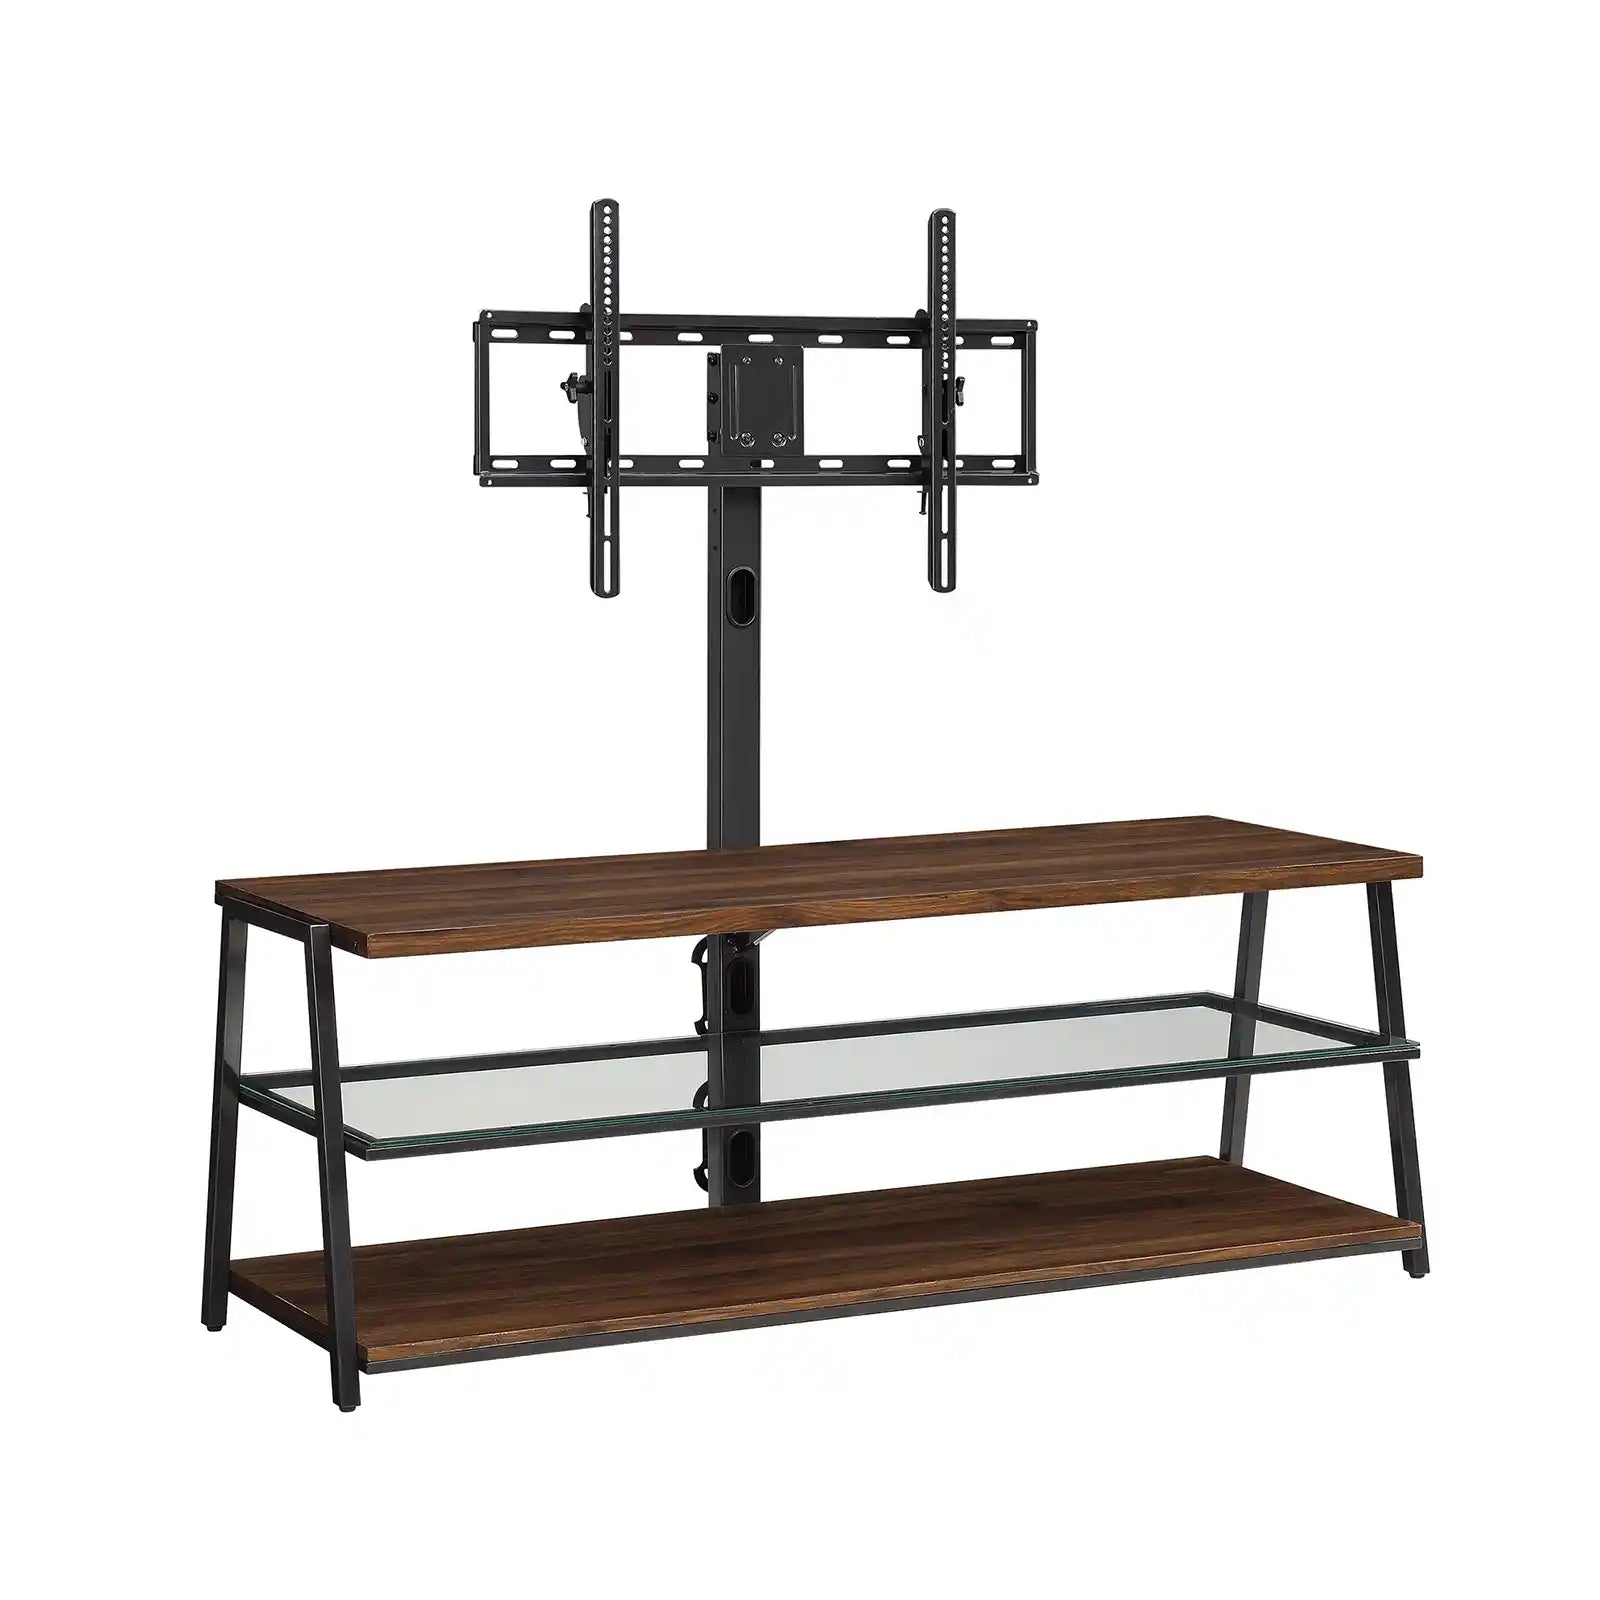 3-in-1 TV Stand for Televisions up to 70"